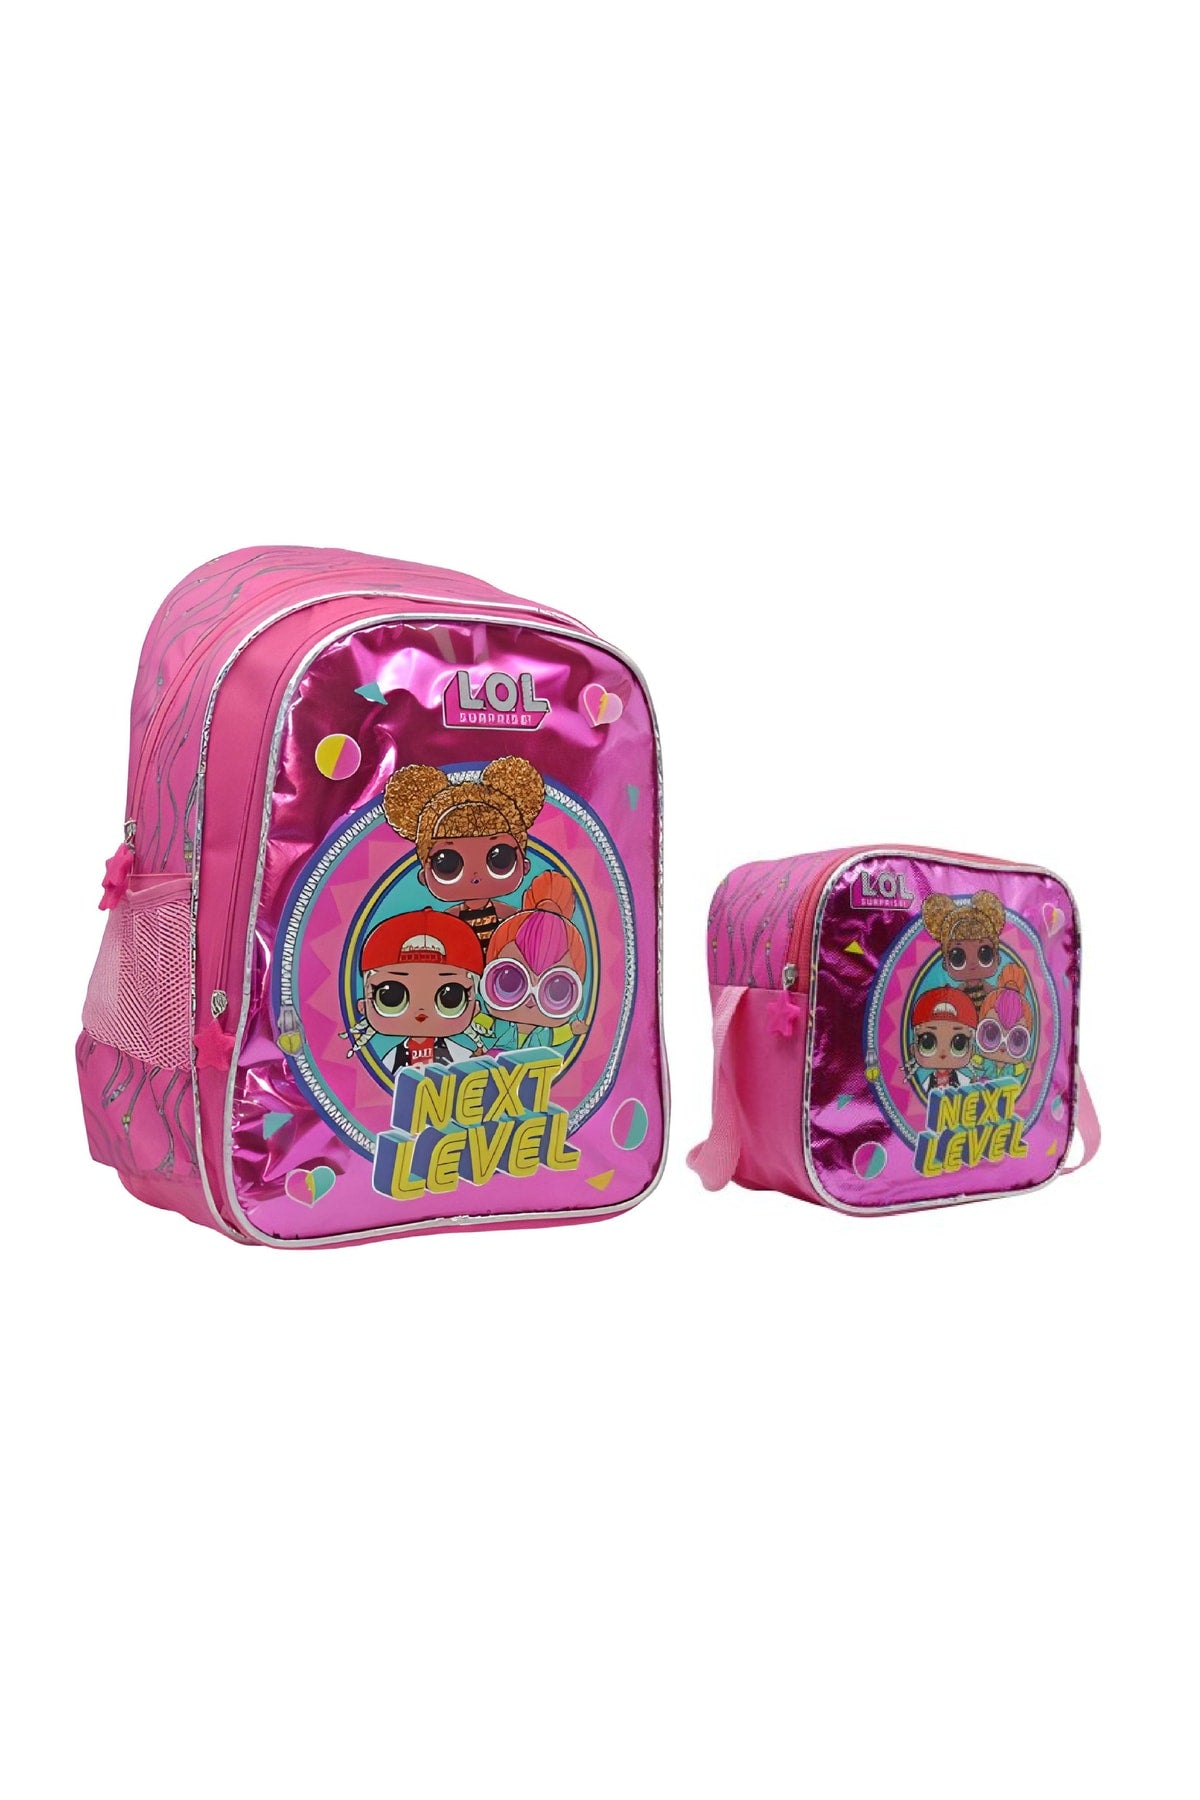 - Lol Omg School Backpack And Lunch Box Set